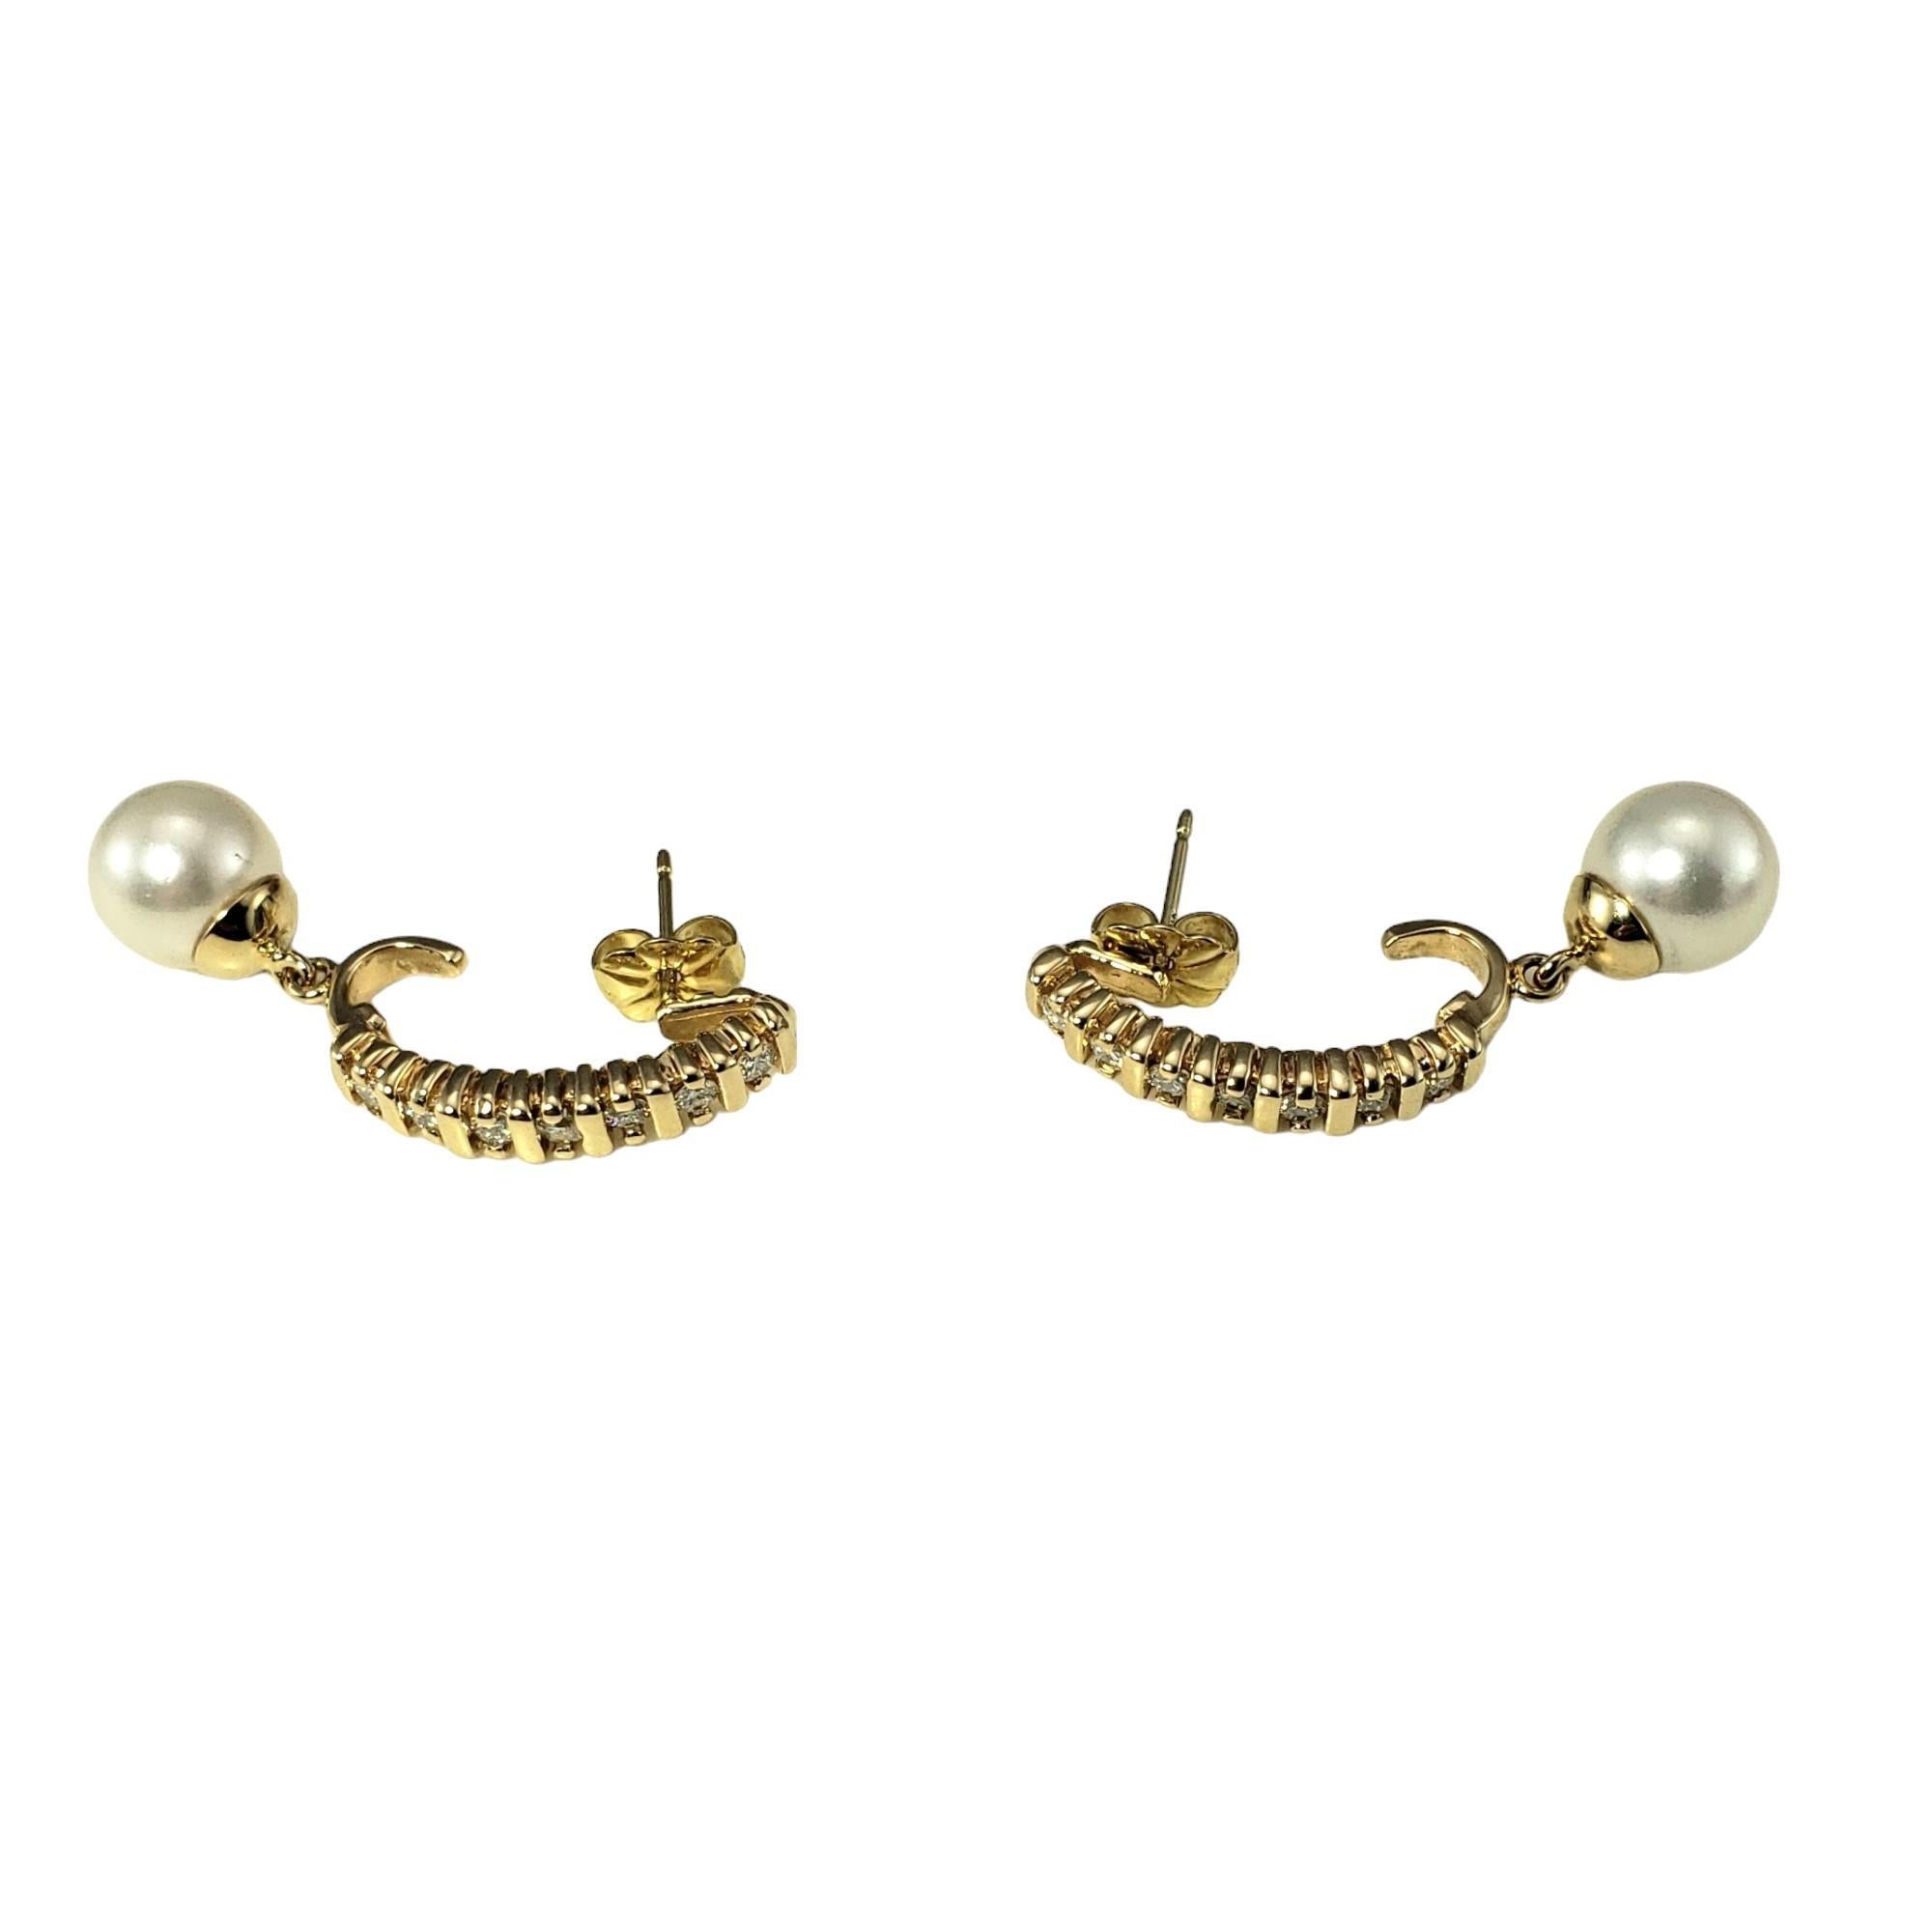 14K Yellow Gold Diamond and Pearl Earrings-

These elegant earrings each feature one round cultured pearl (8 mm) and seven round brilliant cut diamonds set in classic 14K yellow gold.  Push back closures.

Approximate total diamond weight: .42